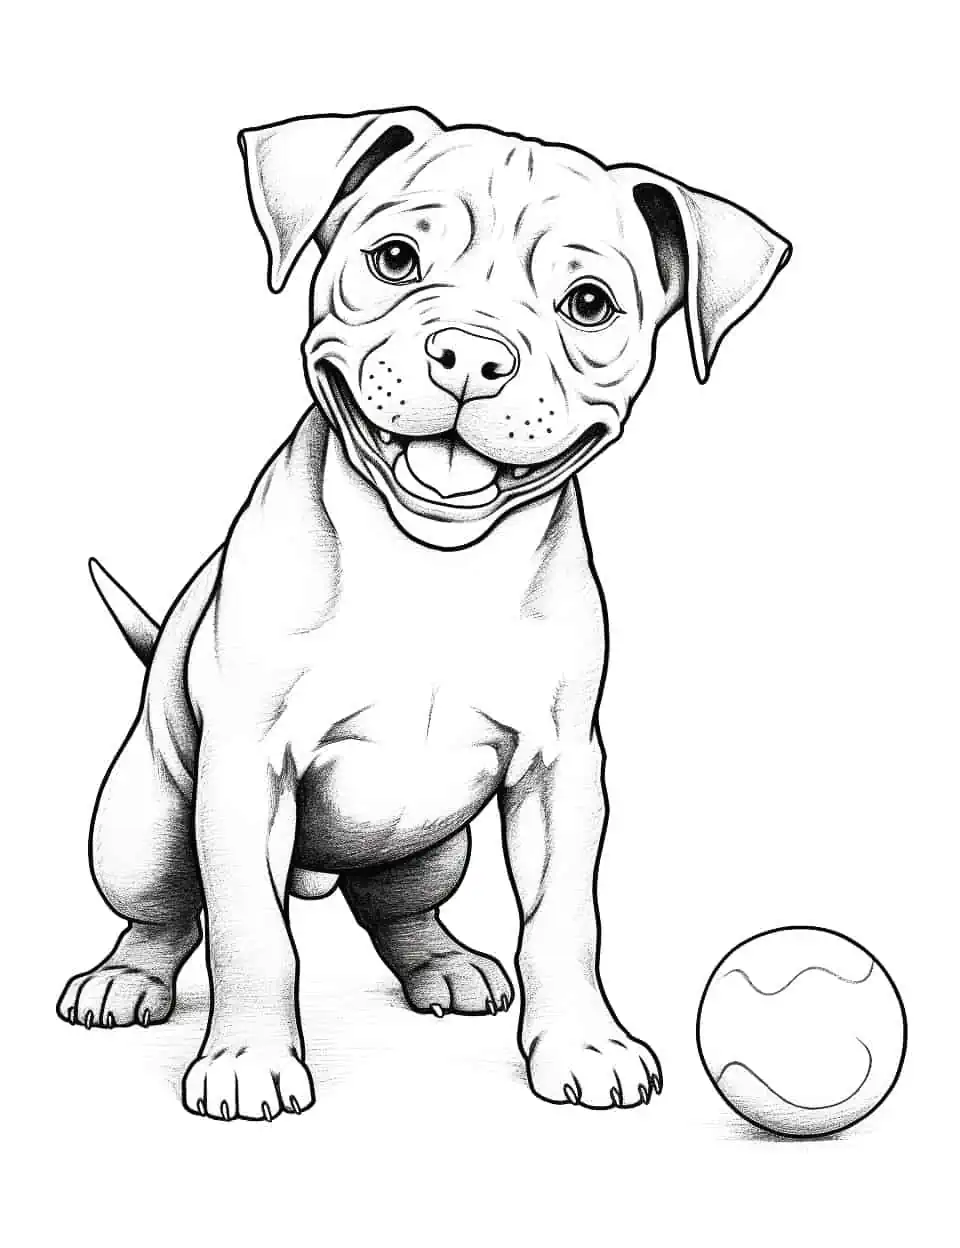 Pitbull Puppy Playing Coloring Page - An adorable Pitbull puppy playing with a colorful ball.